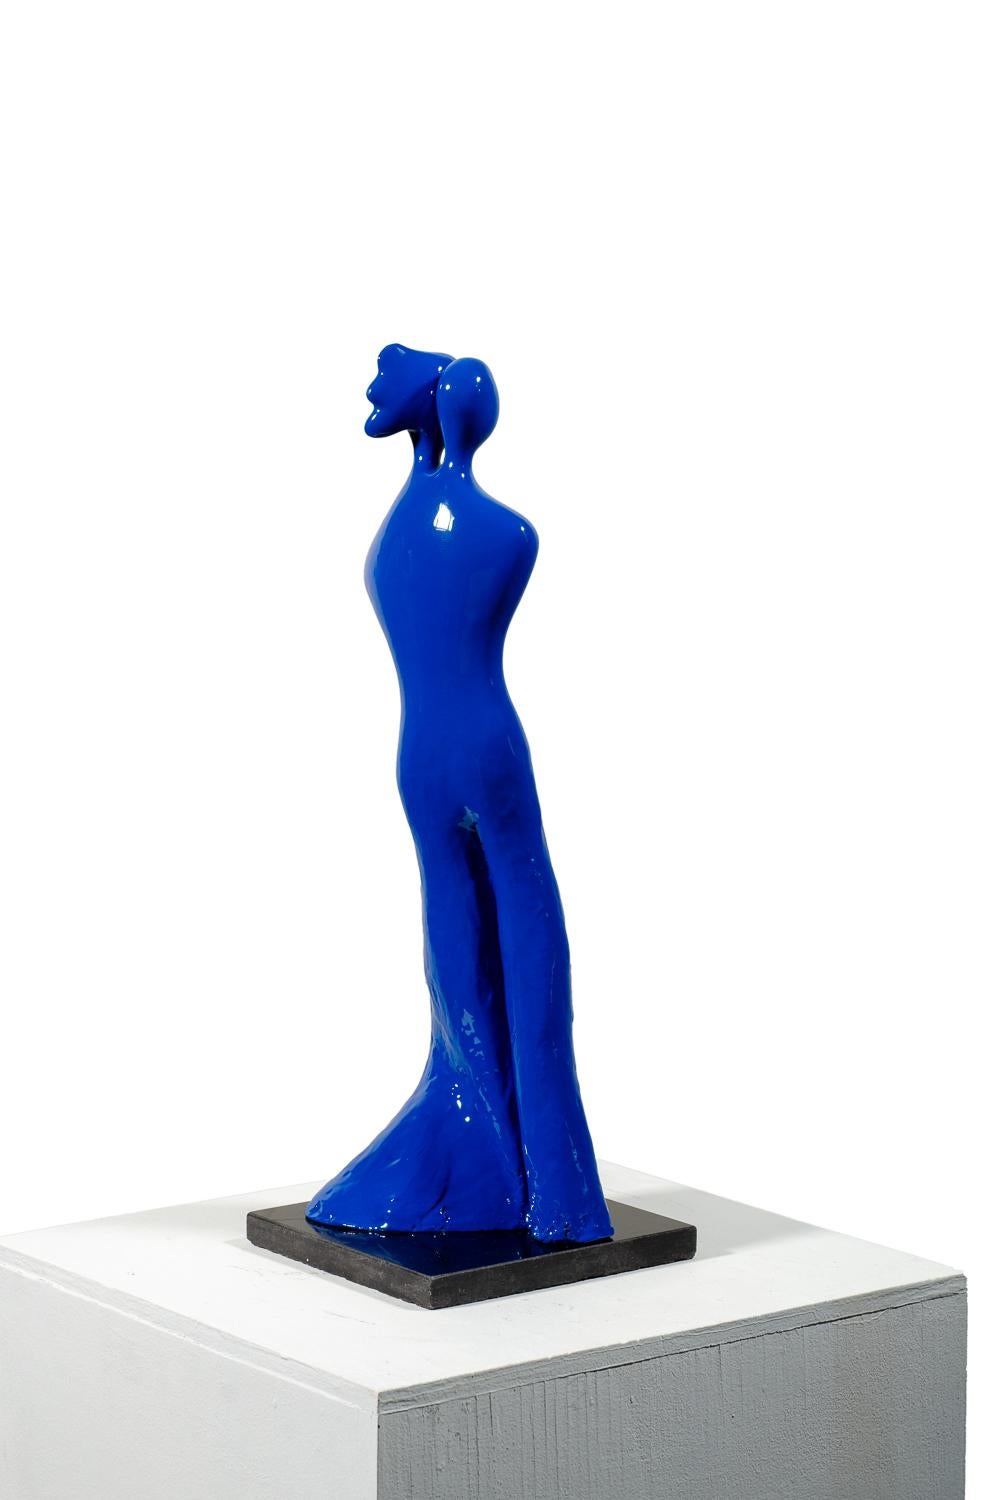 Soul Mates #1 (in blue) When in love, their souls and bodies fuse into just one. - Gold Figurative Sculpture by Beatriz Gerenstein